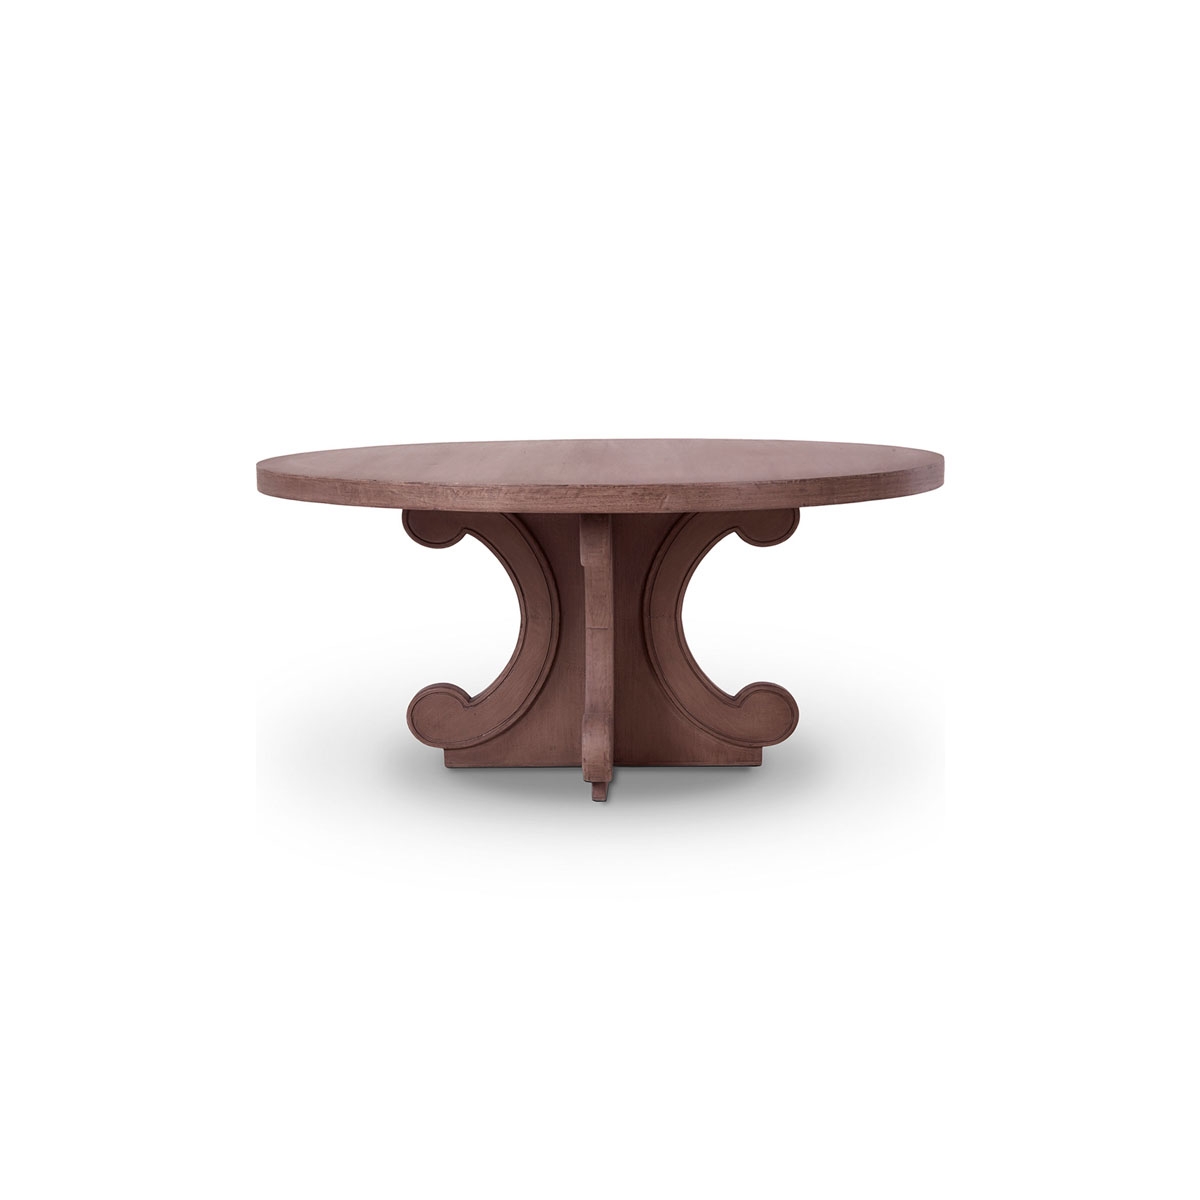 Romulus Round Dining Table 72"